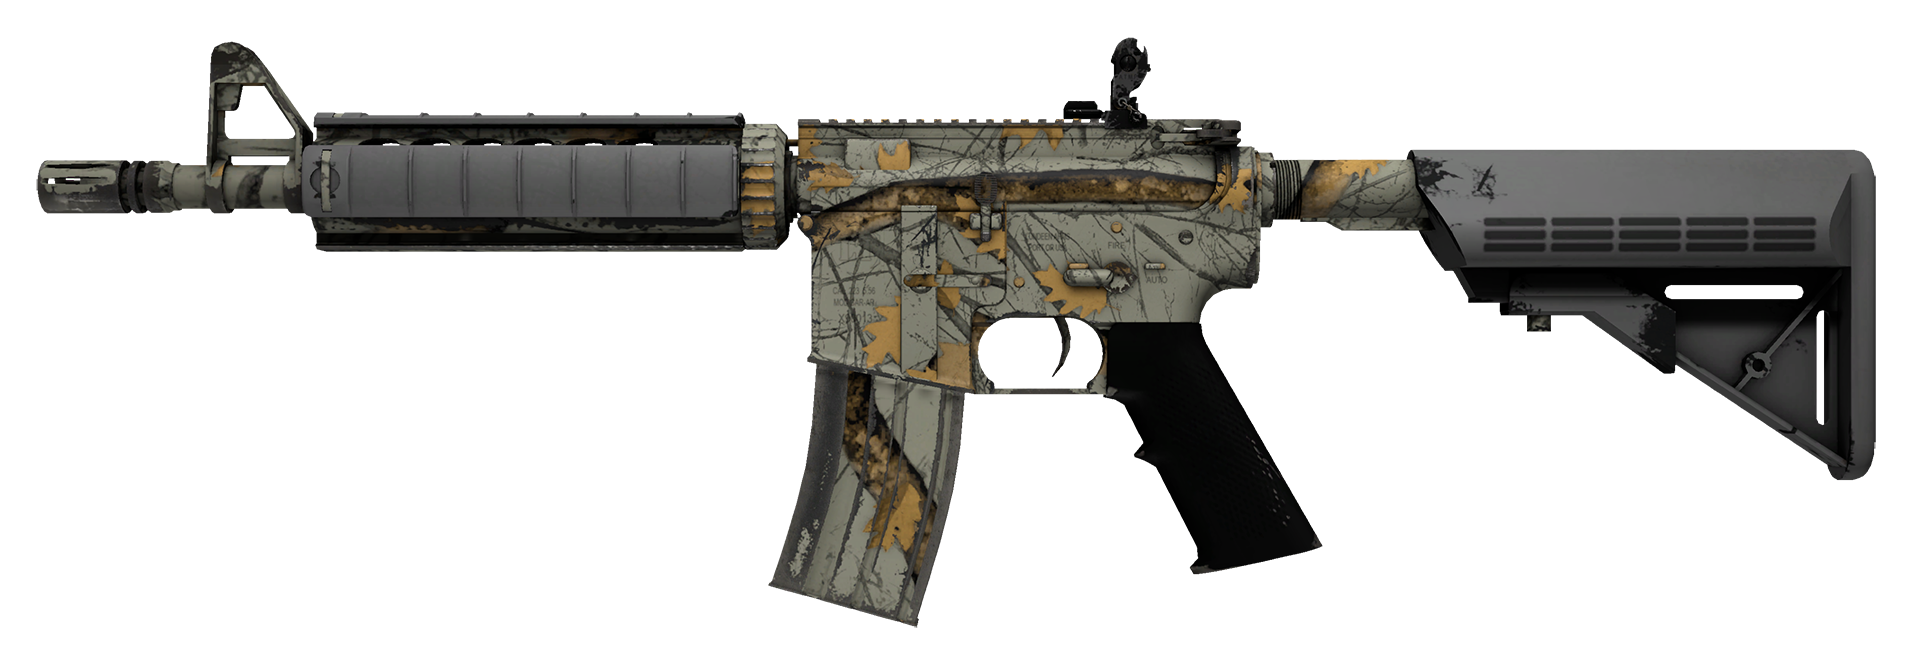 Ft m4a4 cyber security фото 59